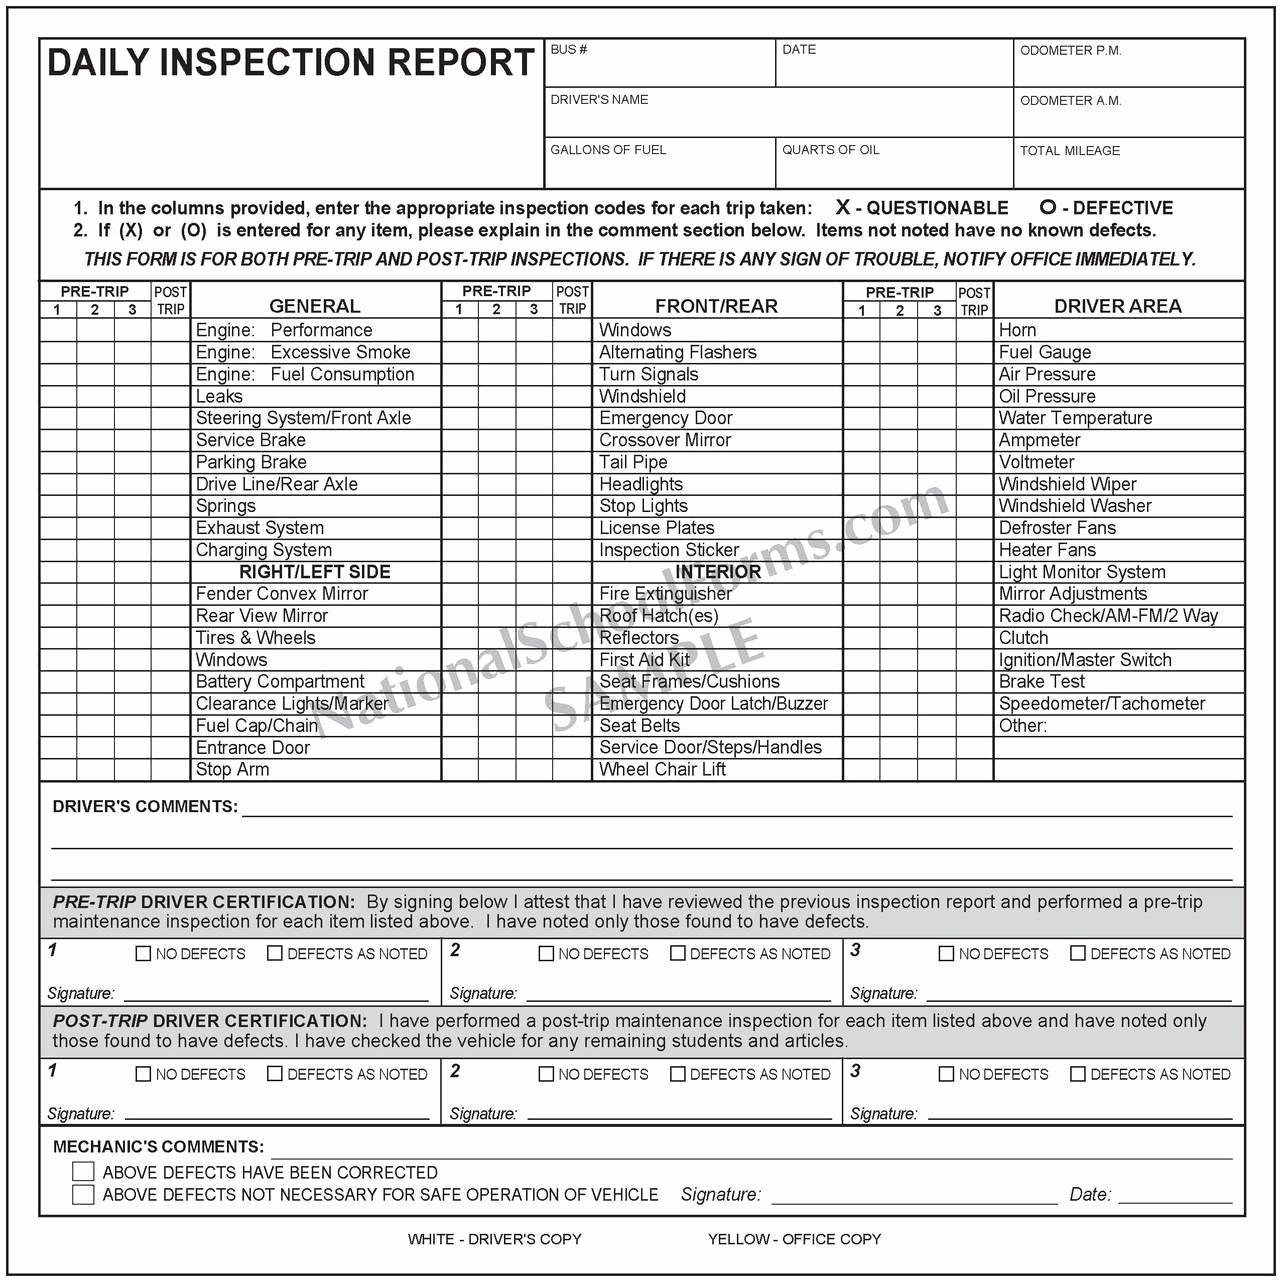 Daily Truck Inspection Checklist Elegant Daily Inspection Report with Pre and Post Trip Nationalschoolforms